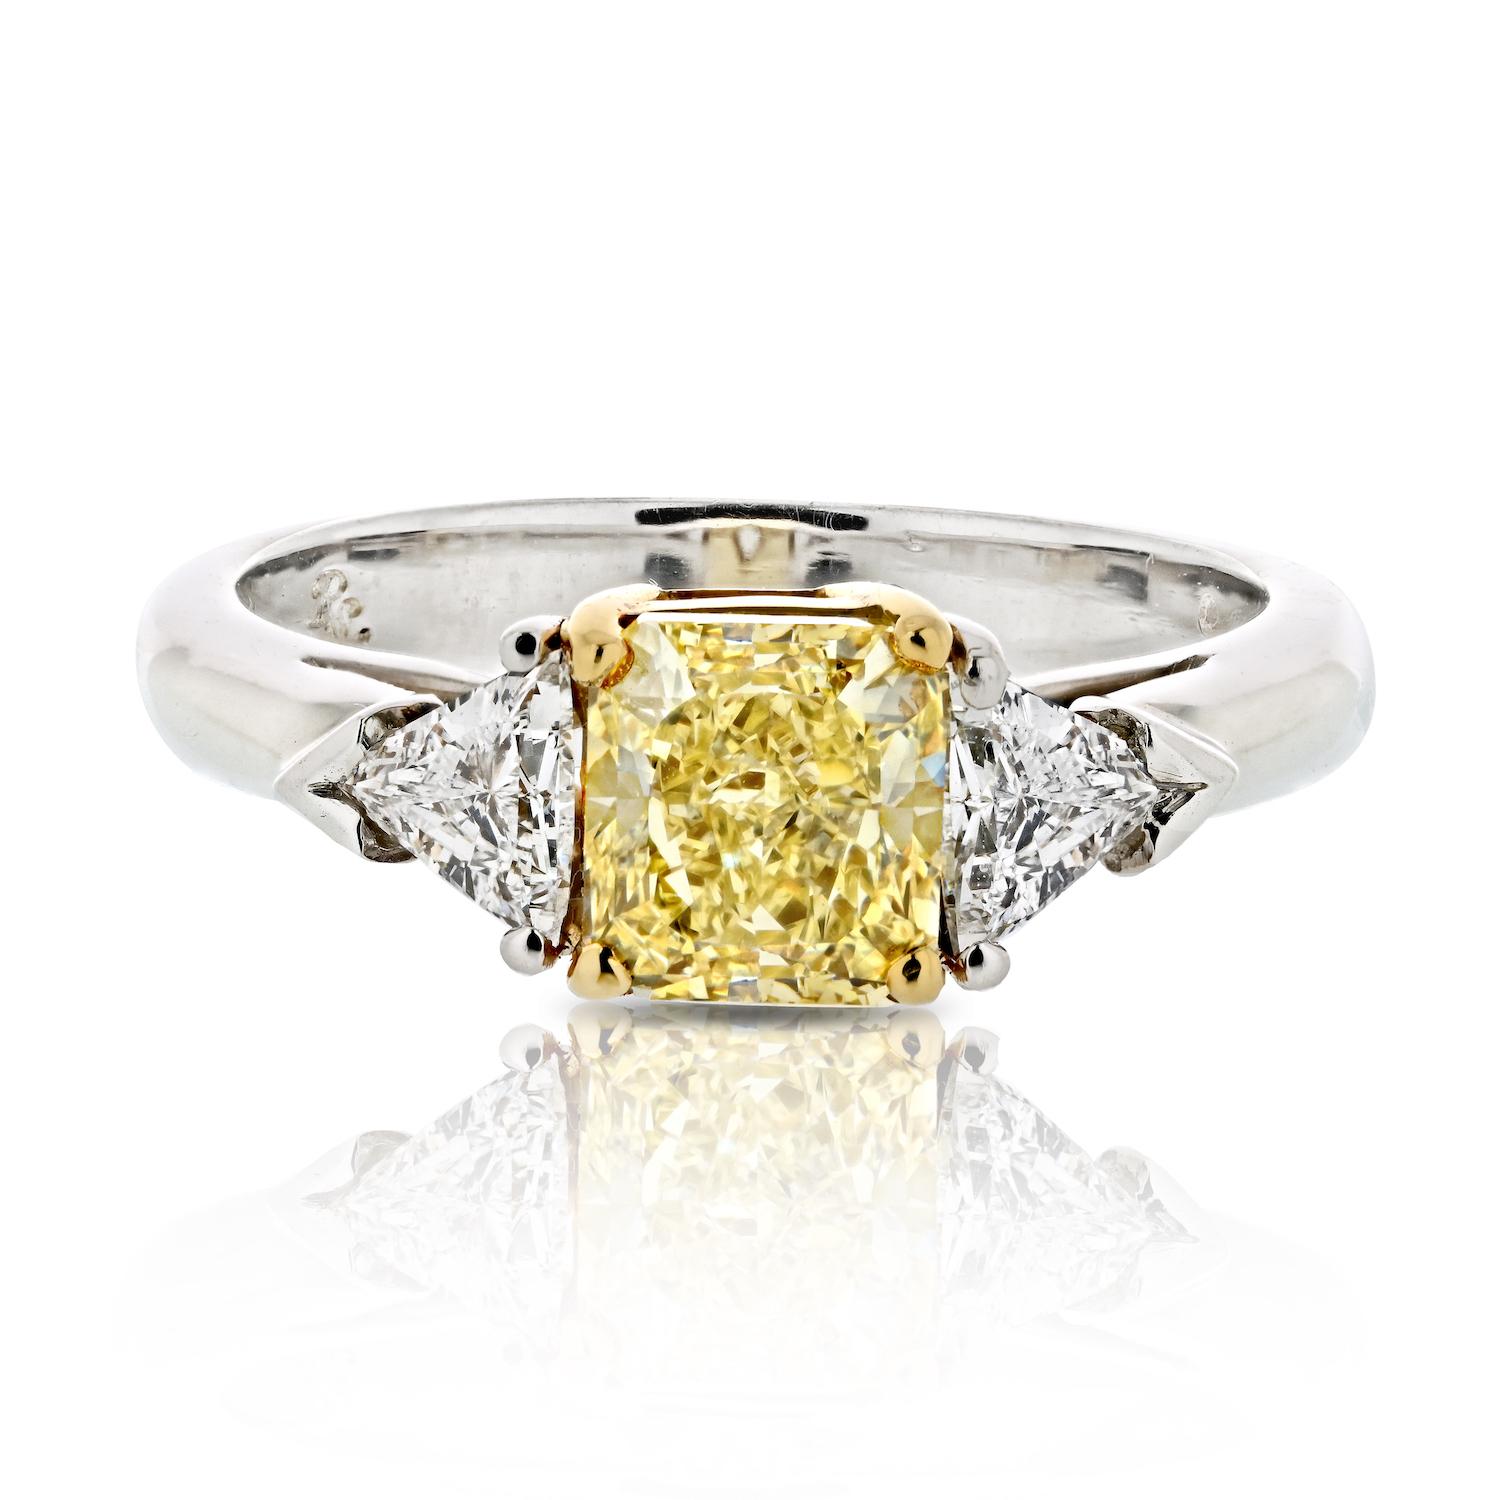 Celebrate the radiant journey of your love with this 1.27 carat Radiant Cut Fancy Yellow Trilliant Cut Three Stone Diamond Engagement Ring. The center stage belongs to a dazzling 1.27-carat radiant-cut diamond, a beacon of warmth and vibrancy in its